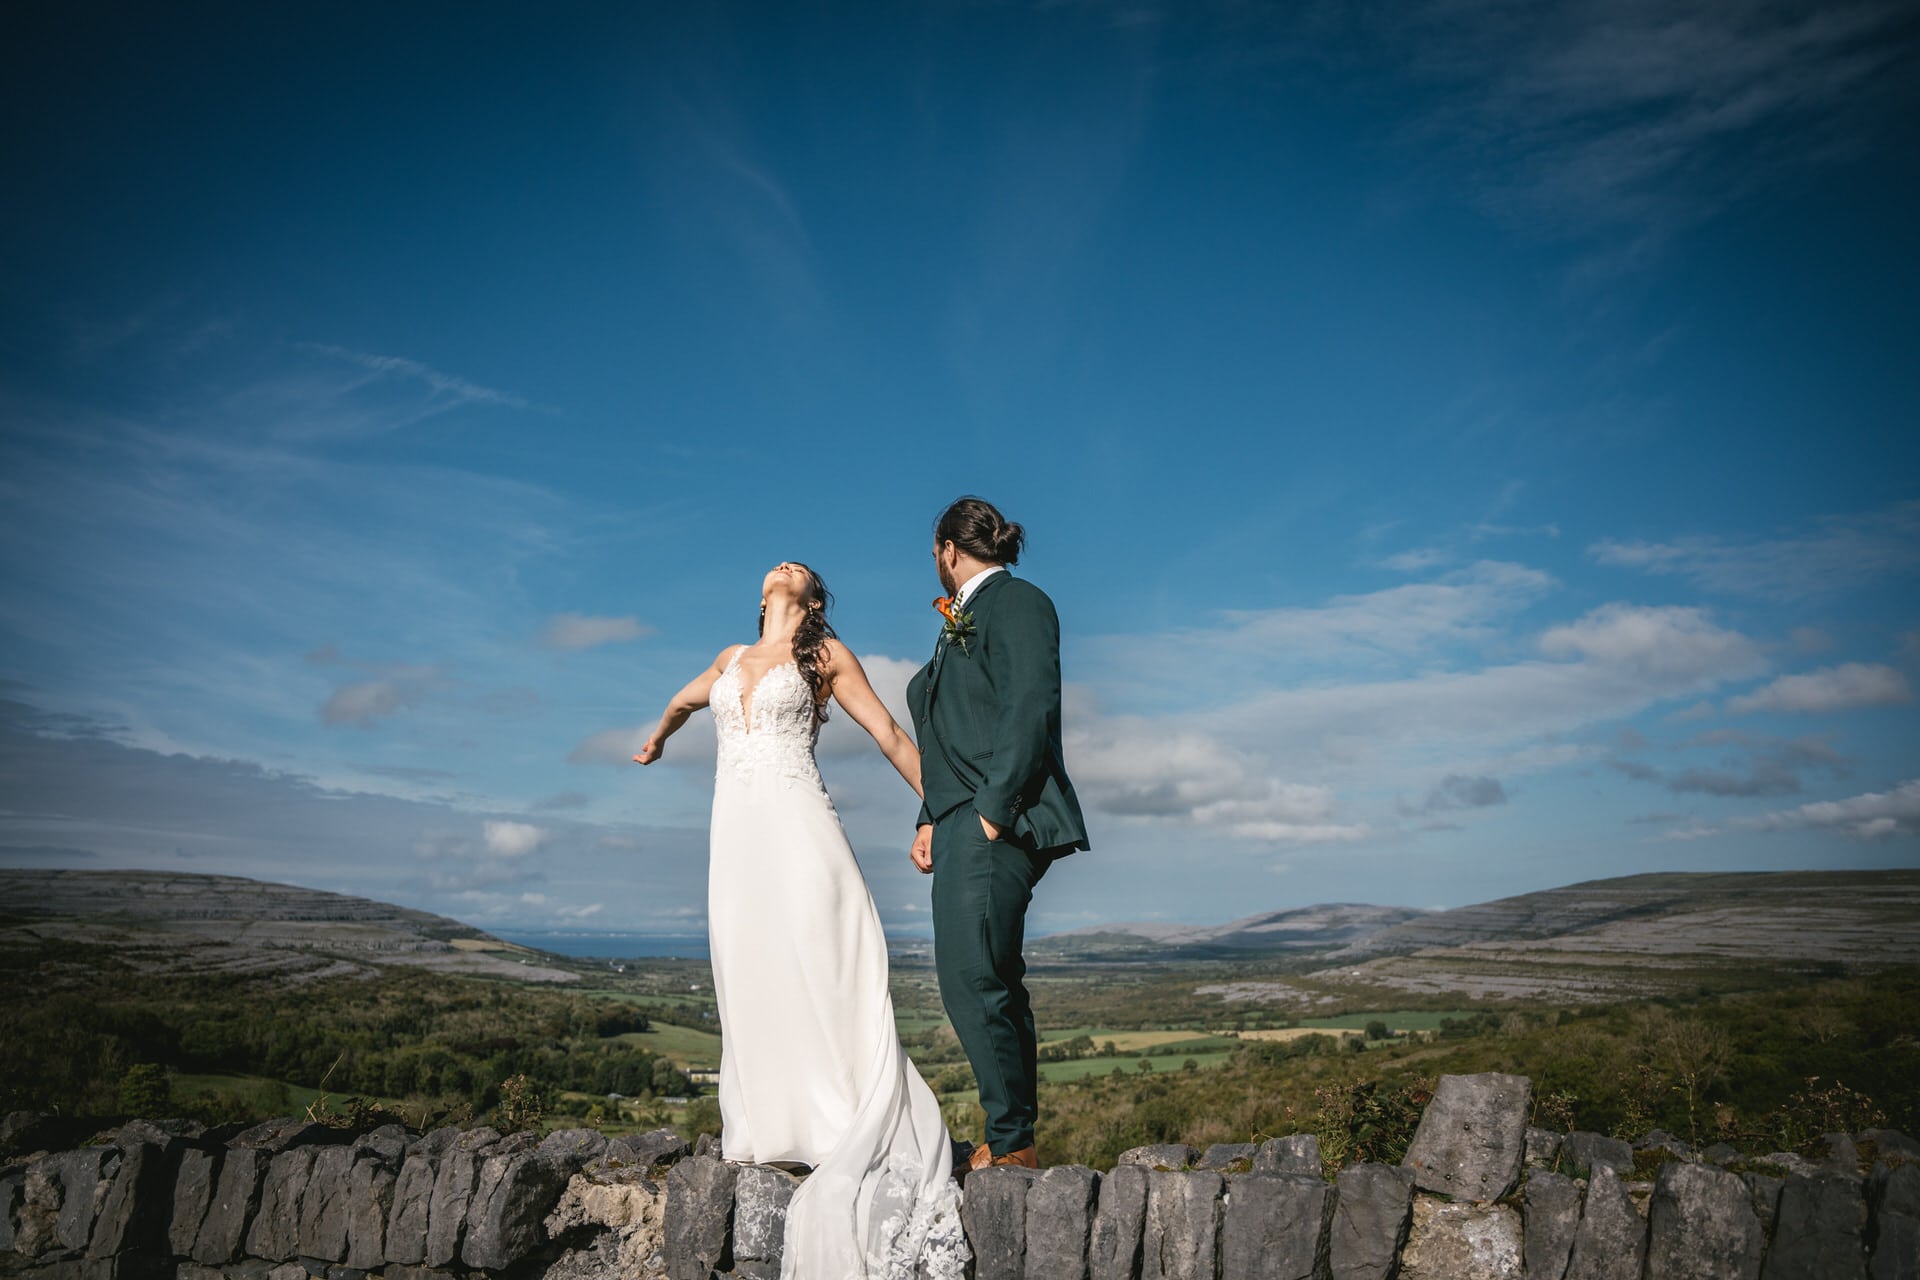 Irish elopement beauty: Vows exchanged in the castle's embrace.